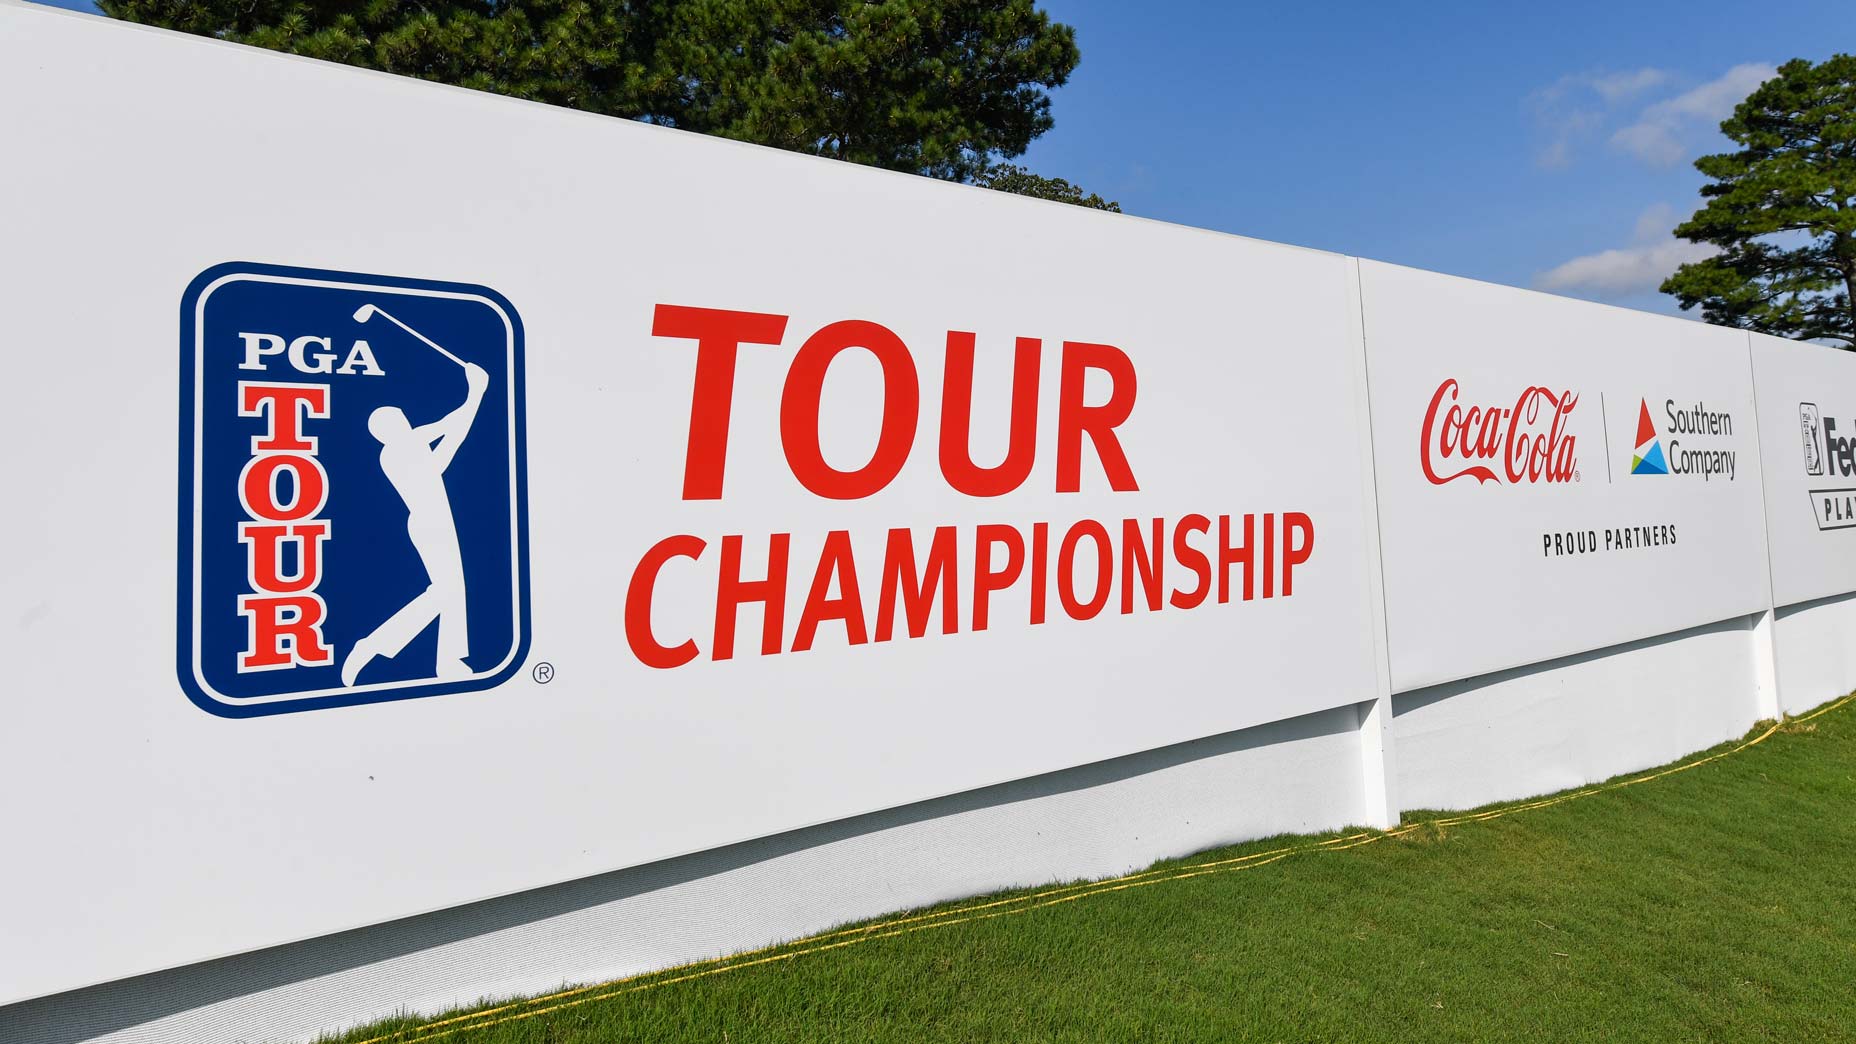 why is the tour championship not a major